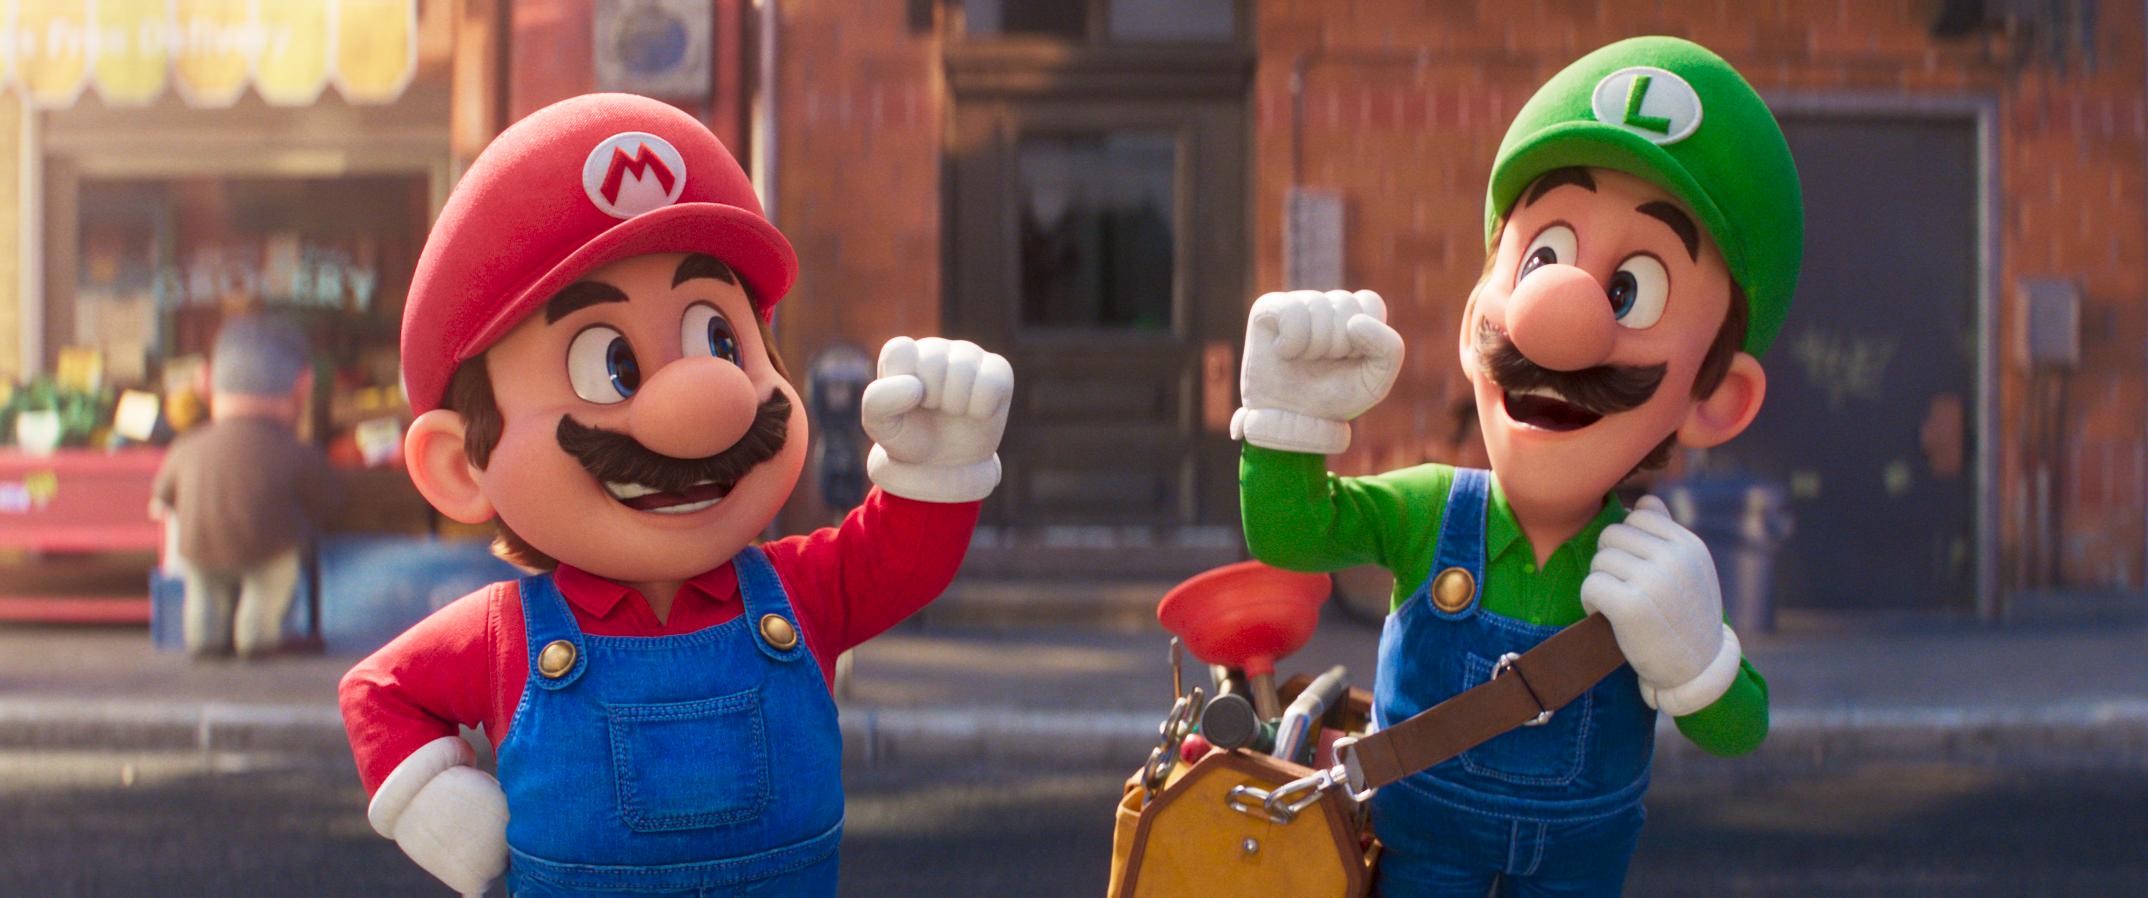 Super Mario Bros.: The Movie was the best animated premiere ever